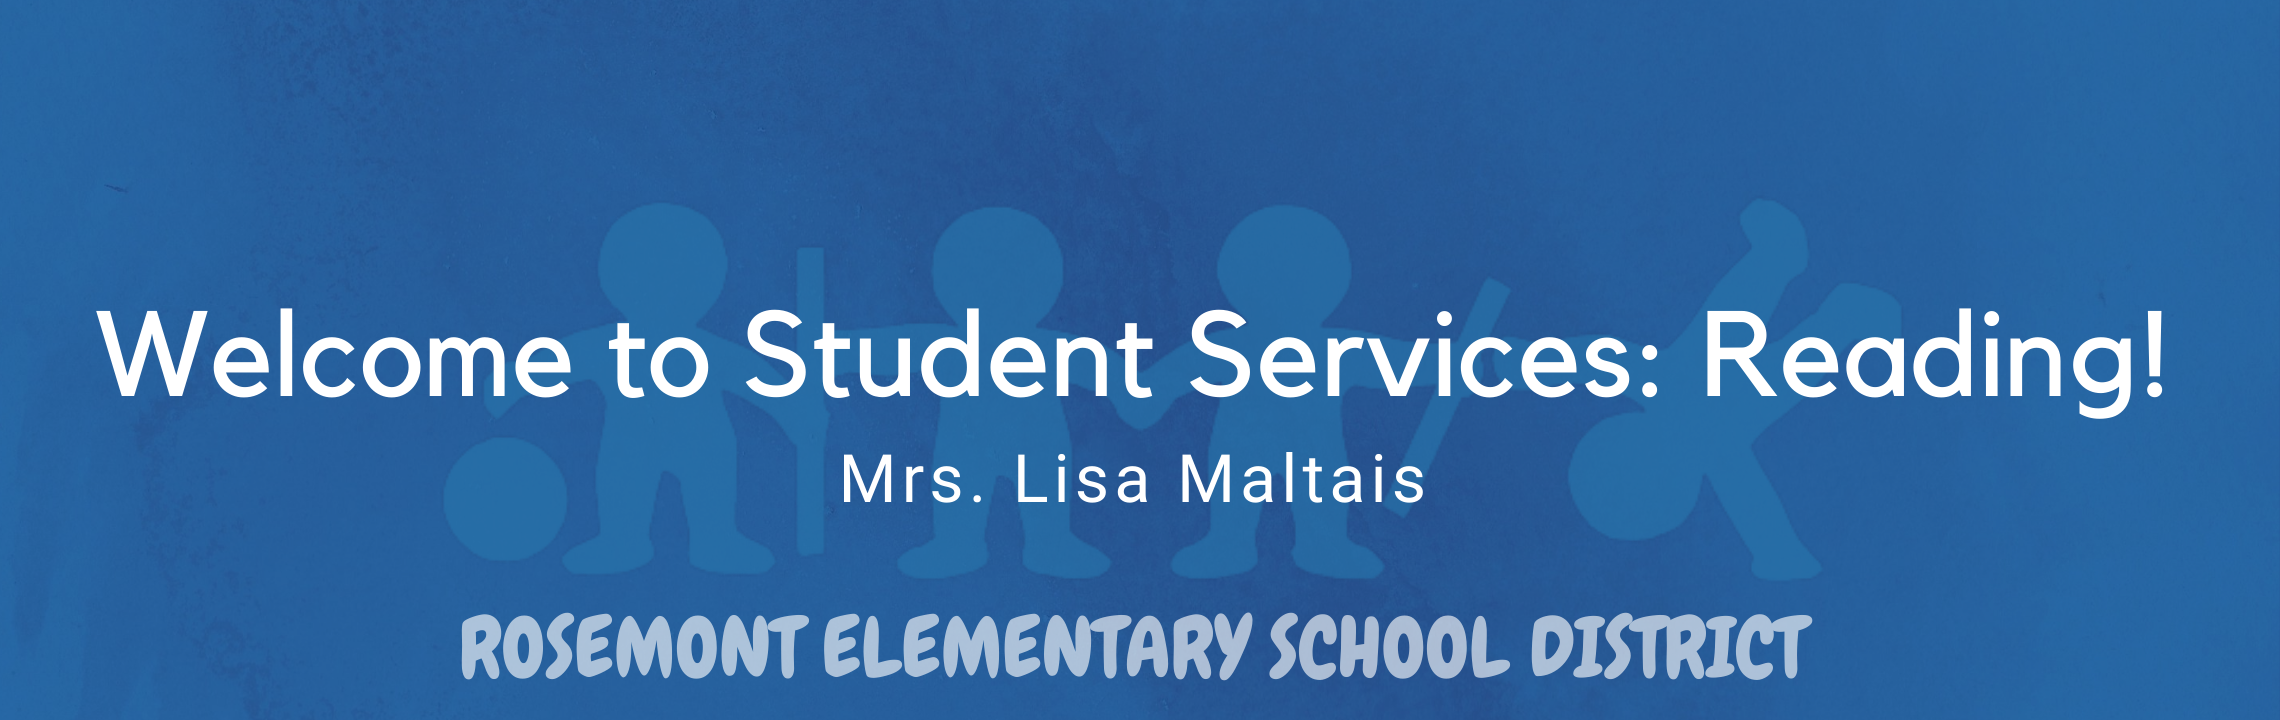 Welcome to Student Services: Reading! Mrs. Lisa Maltais